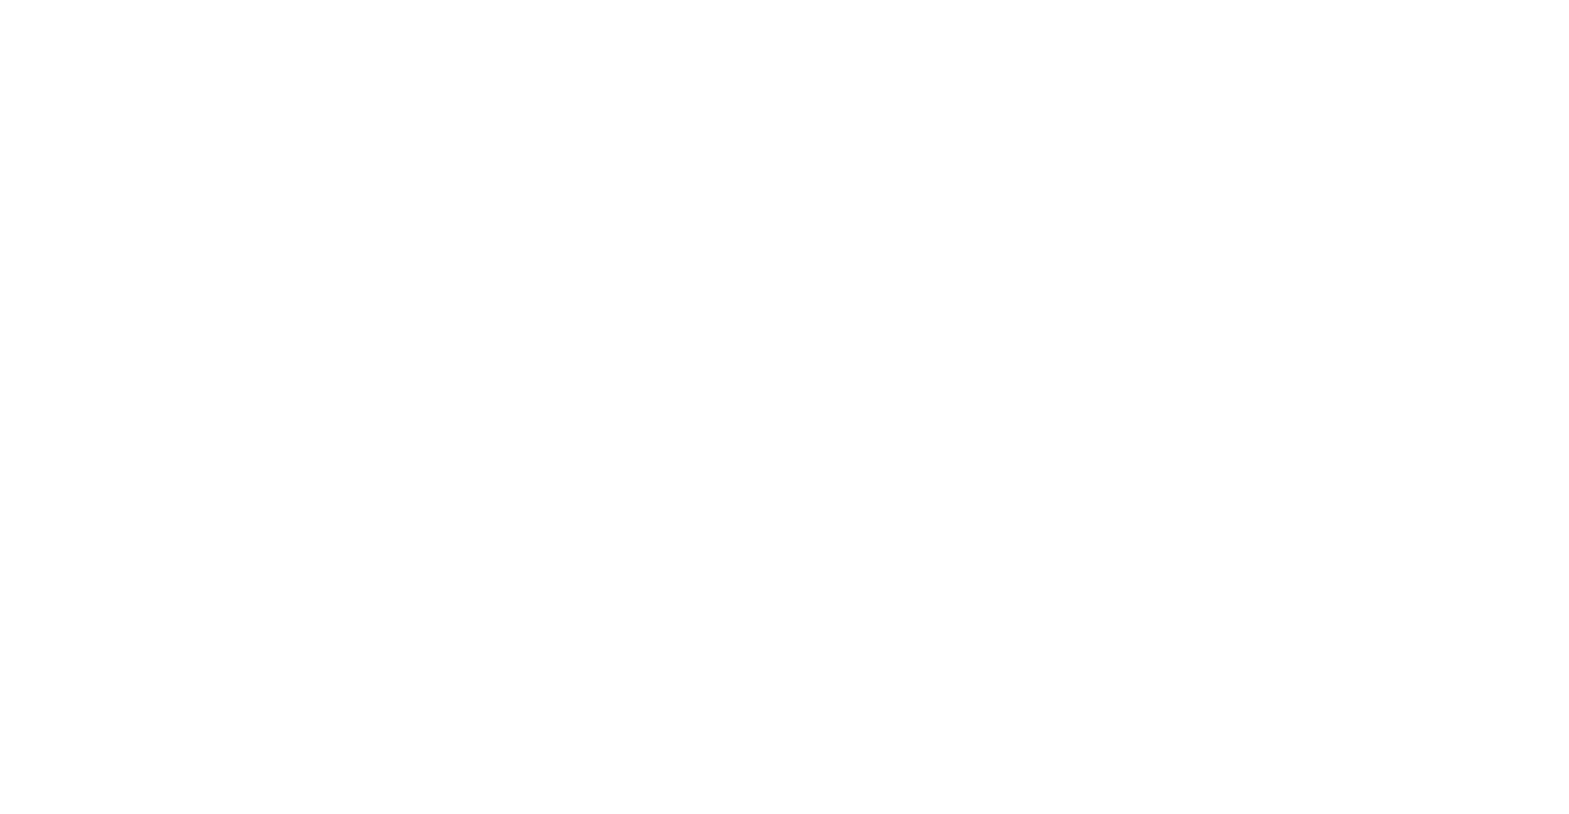 Consolidated Water logo large for dark backgrounds (transparent PNG)